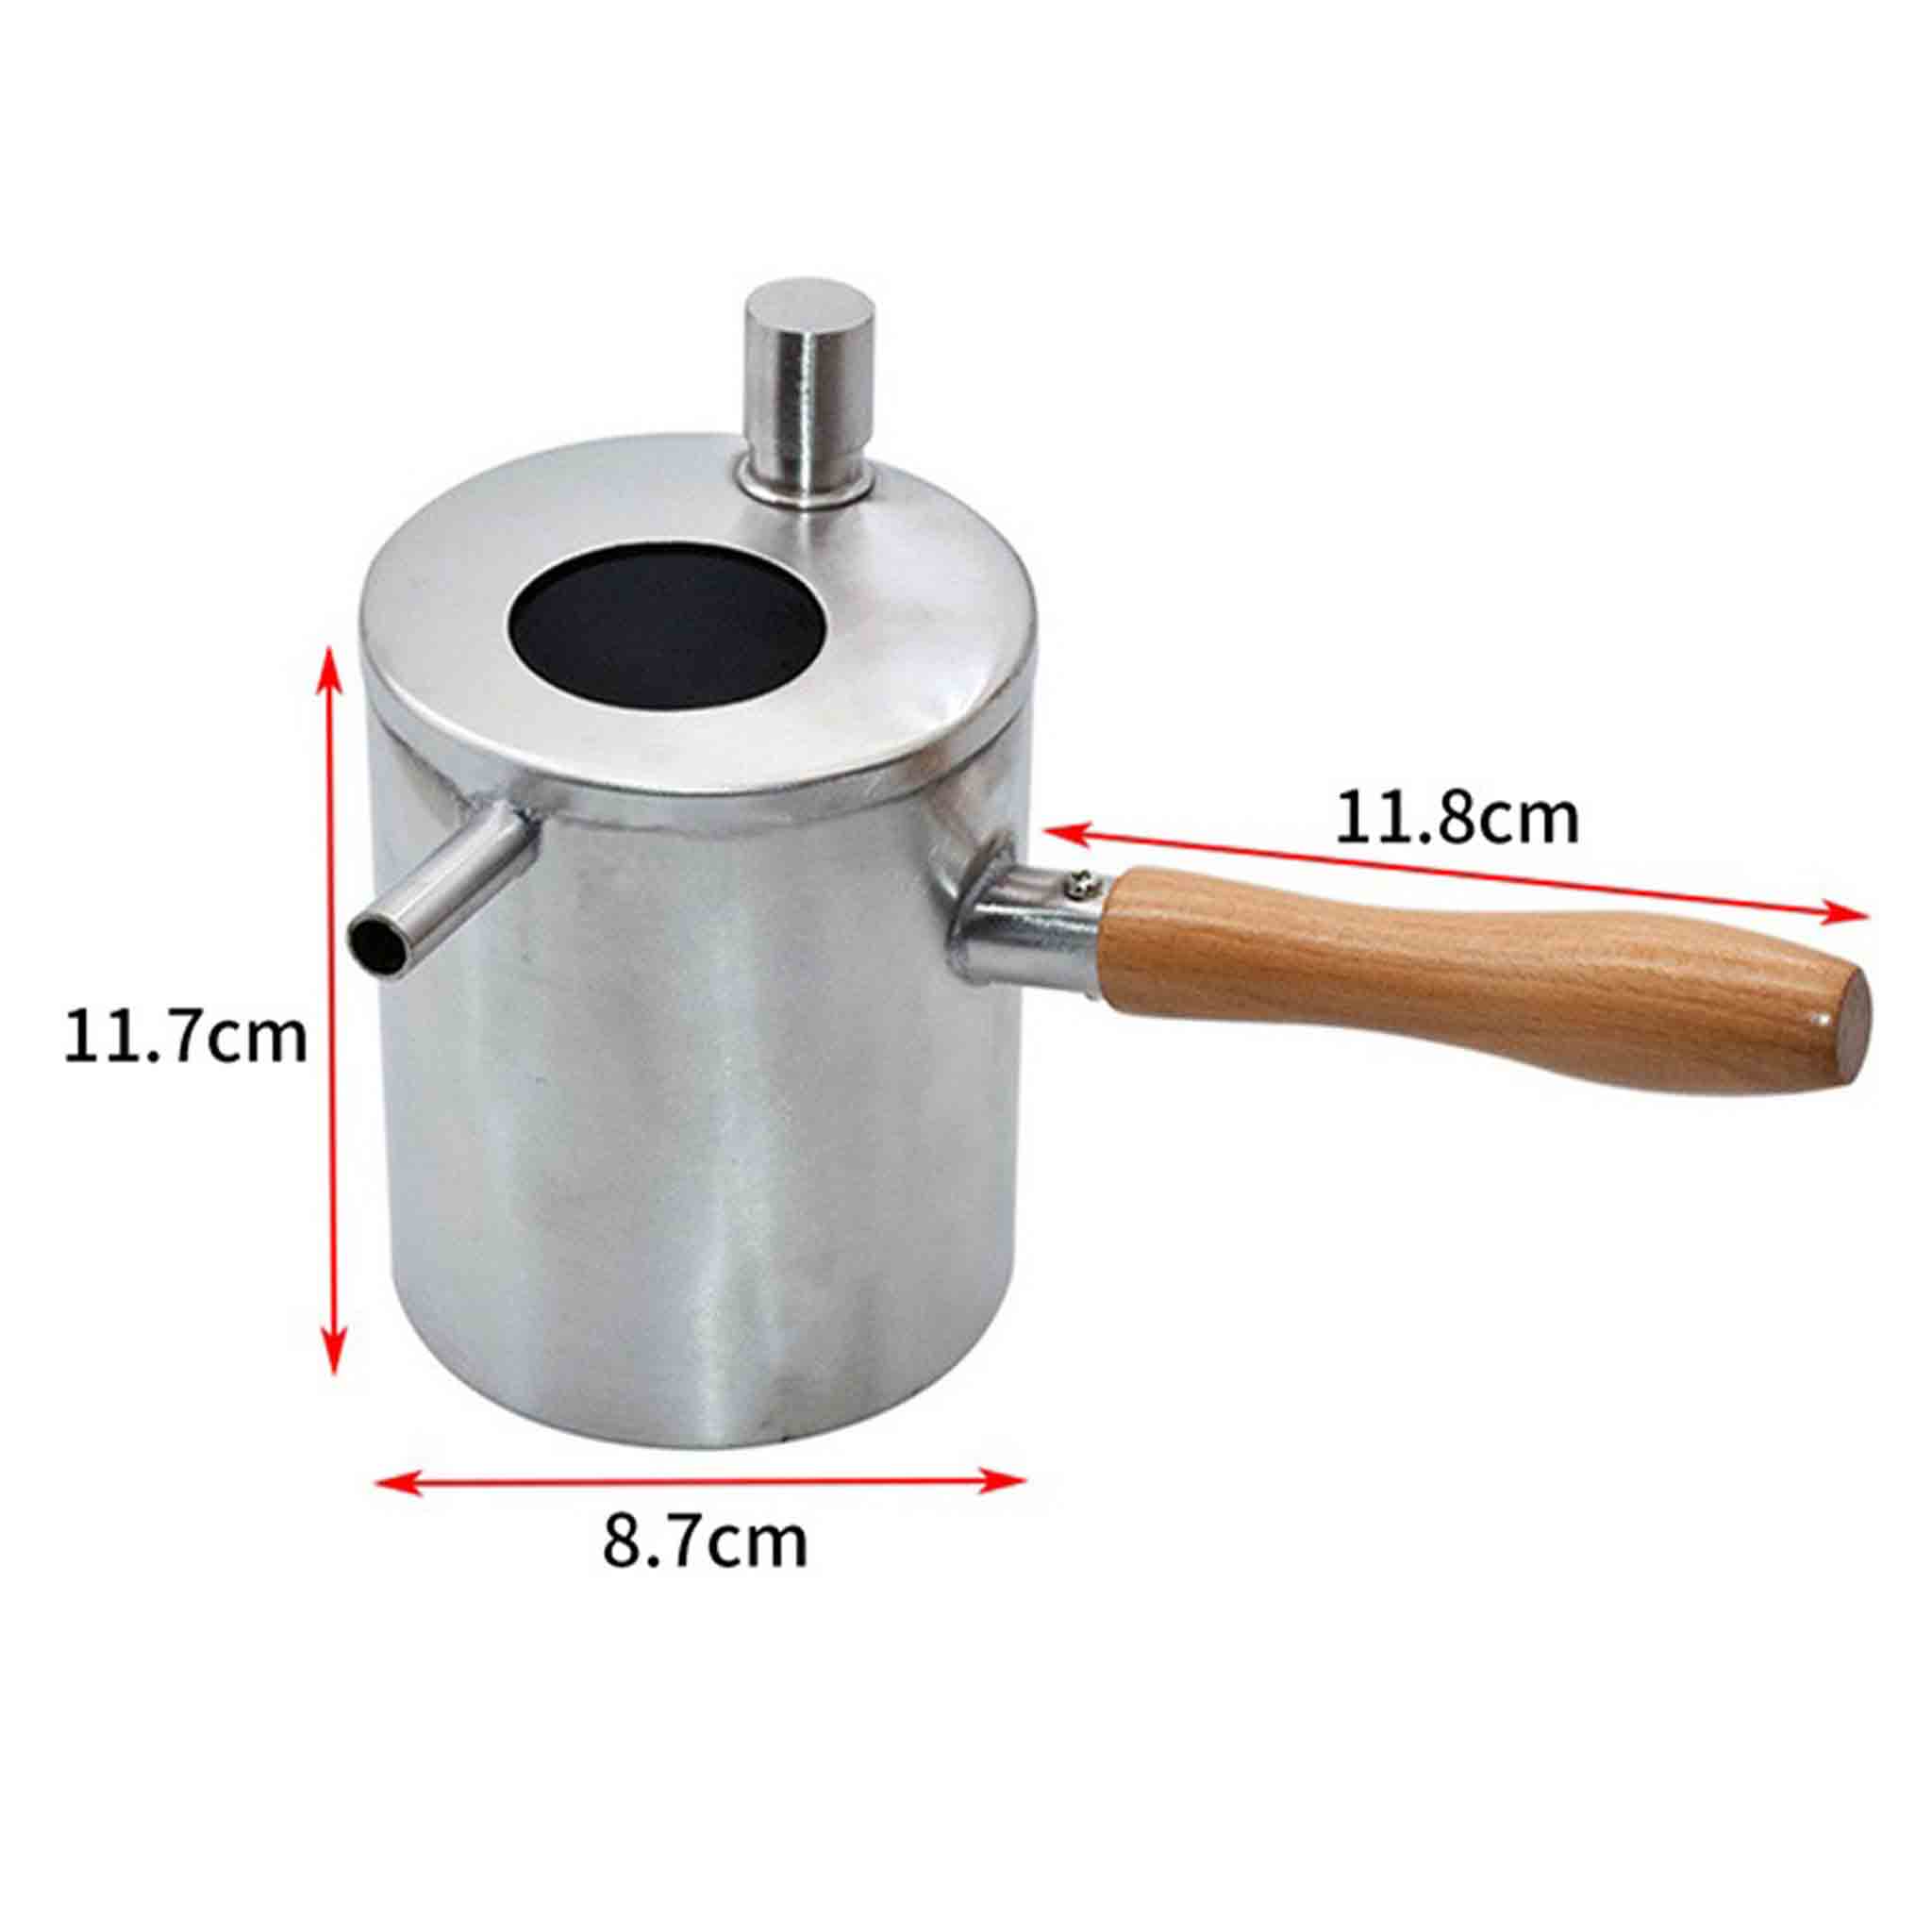 Wax Melting Pot with Poring Spout and Wooden Handle Stainless-steel - Tools collection by Buzzbee Beekeeping Supplies